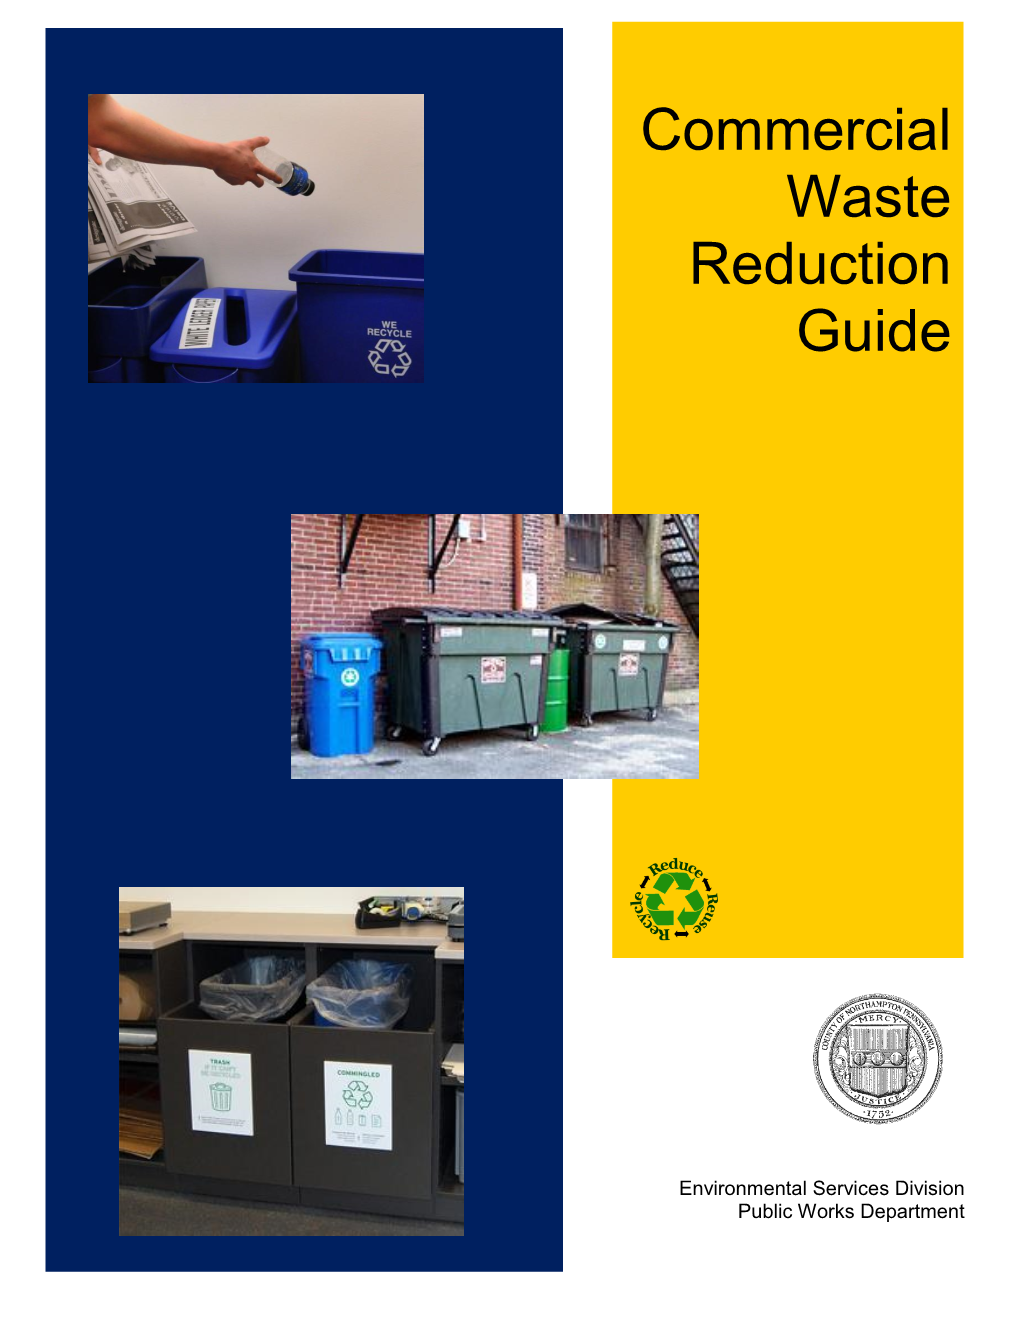 Commercial Waste Reduction Guide